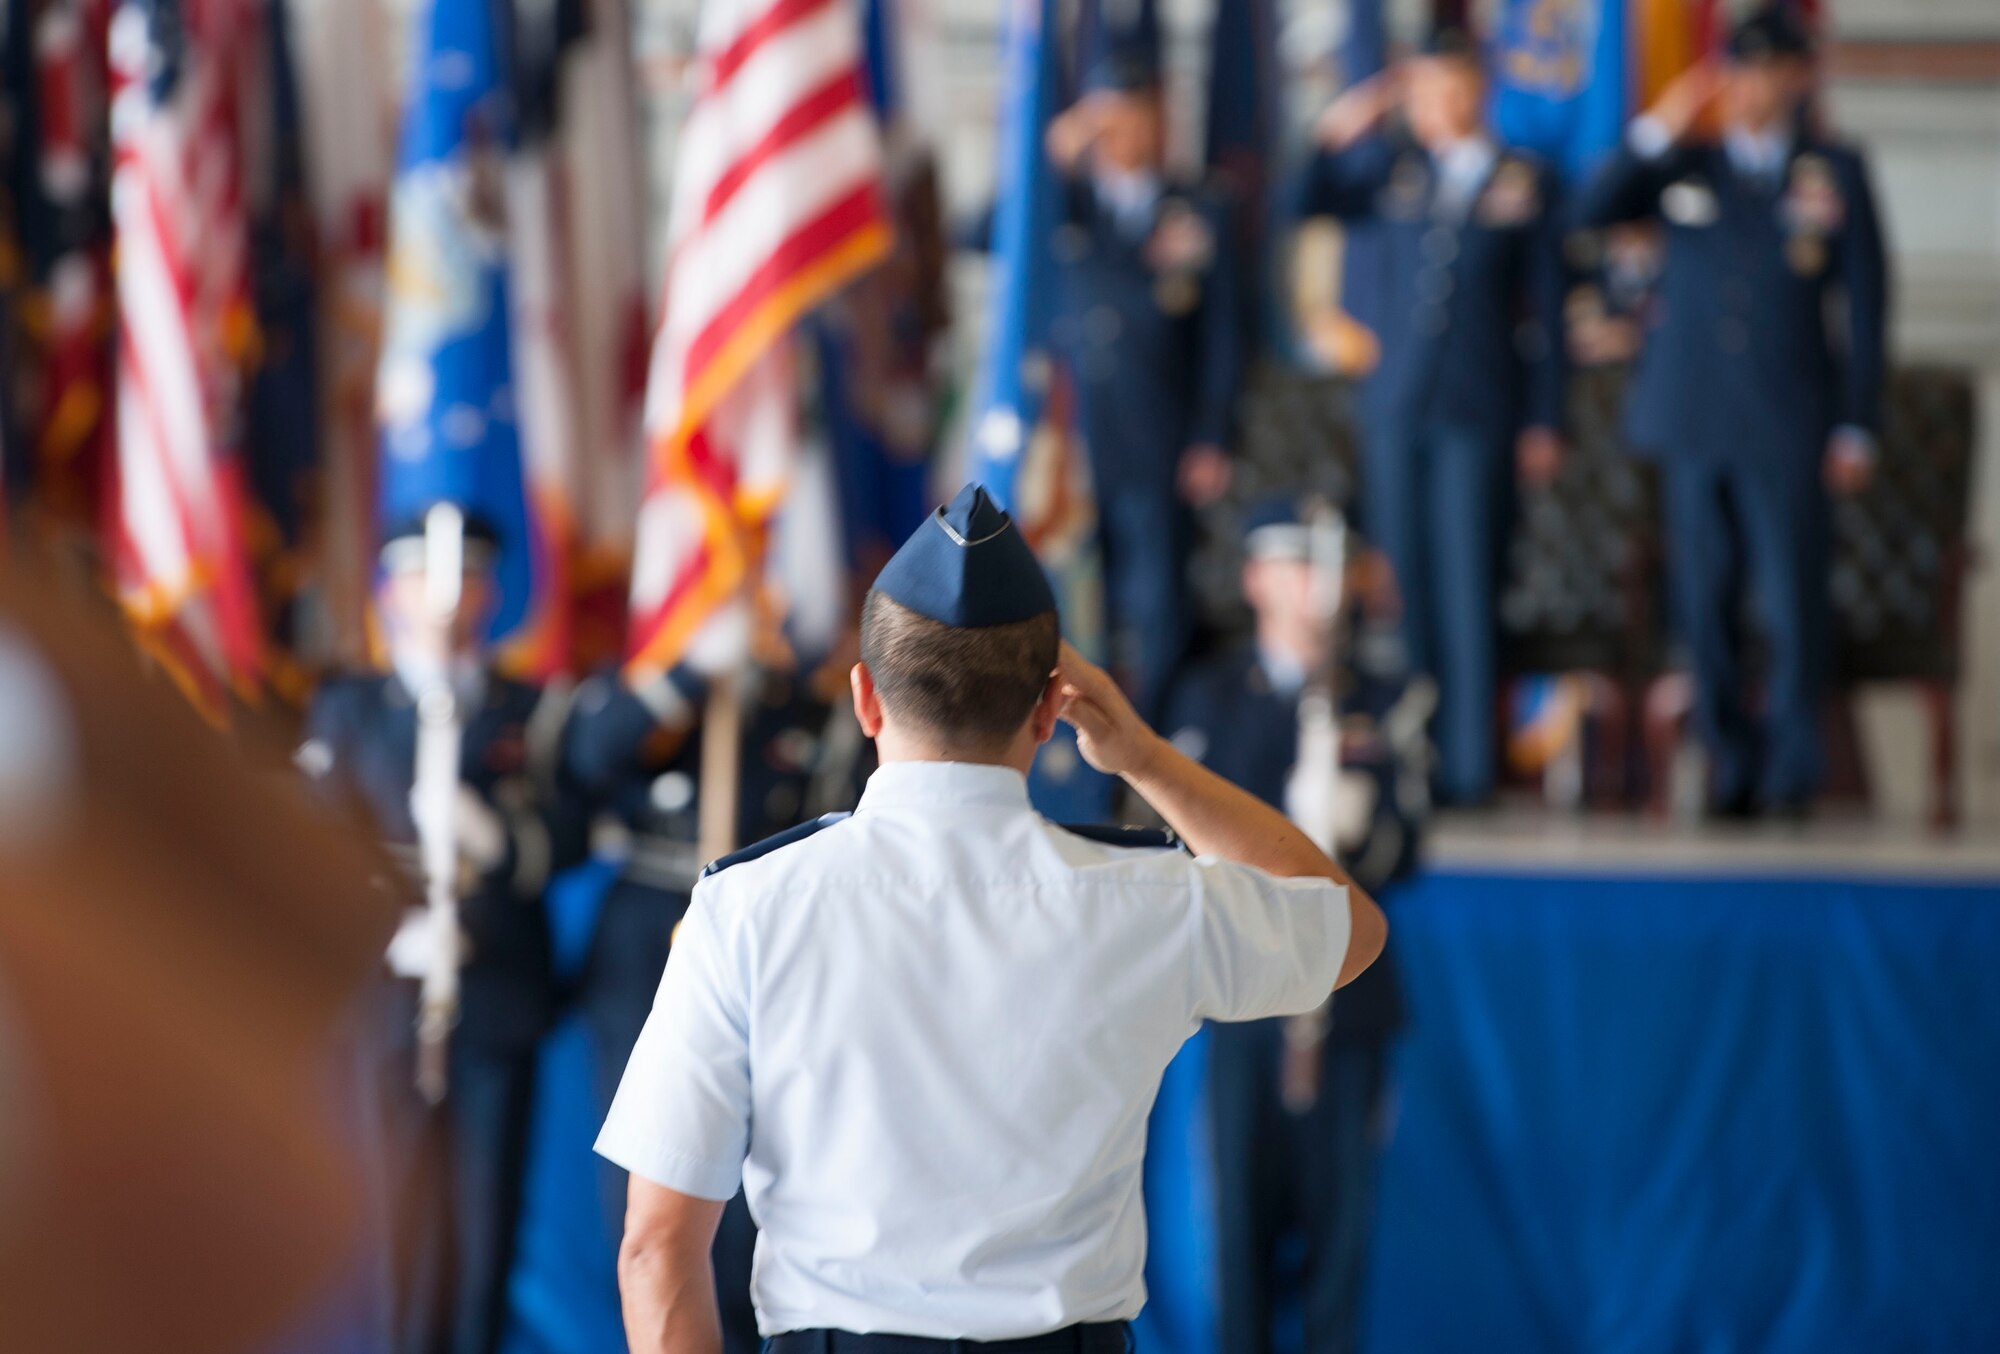 U.S. Air Force Col. Troy Pananon, 6th Air Mobility Wing (AMW) vice commander, renders a salute during the National Anthem at the 6th AMW change of command ceremony, June 29, 2018 at MacDill Air Force Base, Fla.